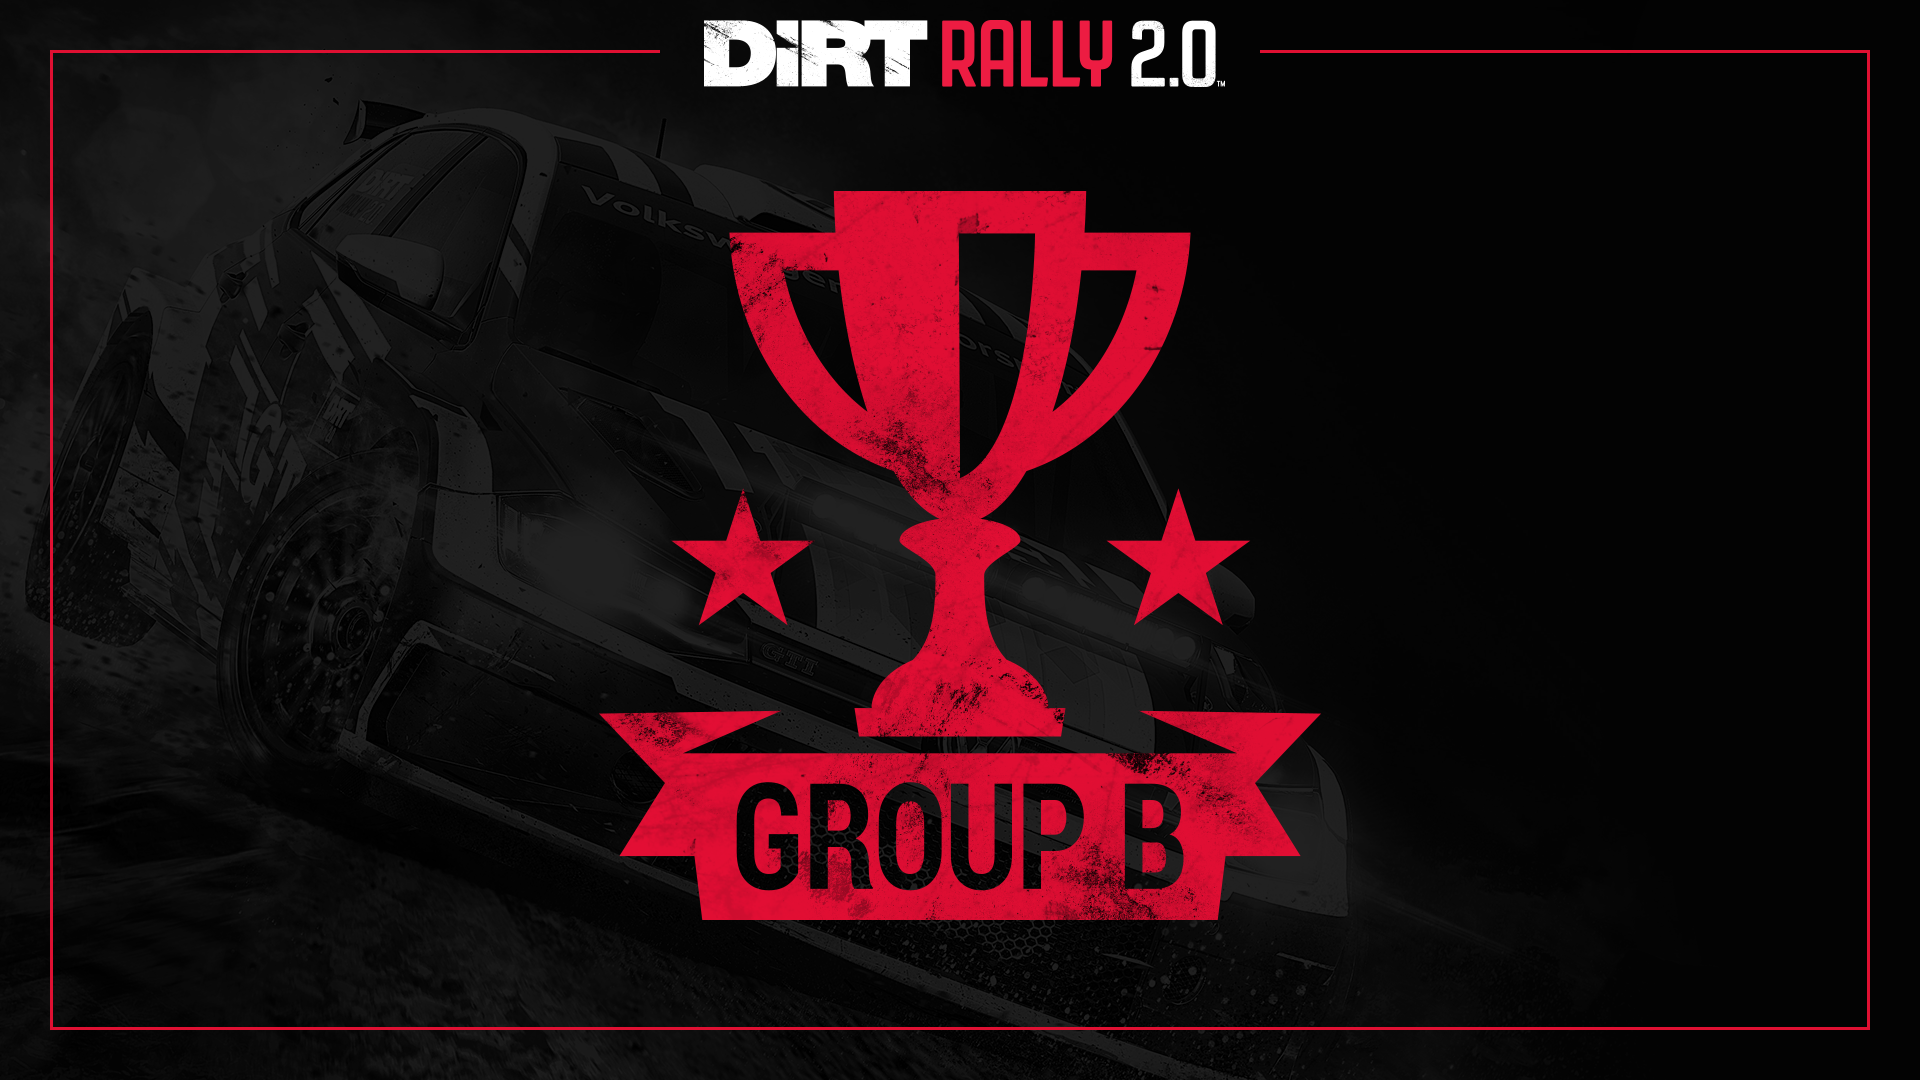 Icon for Group B Master